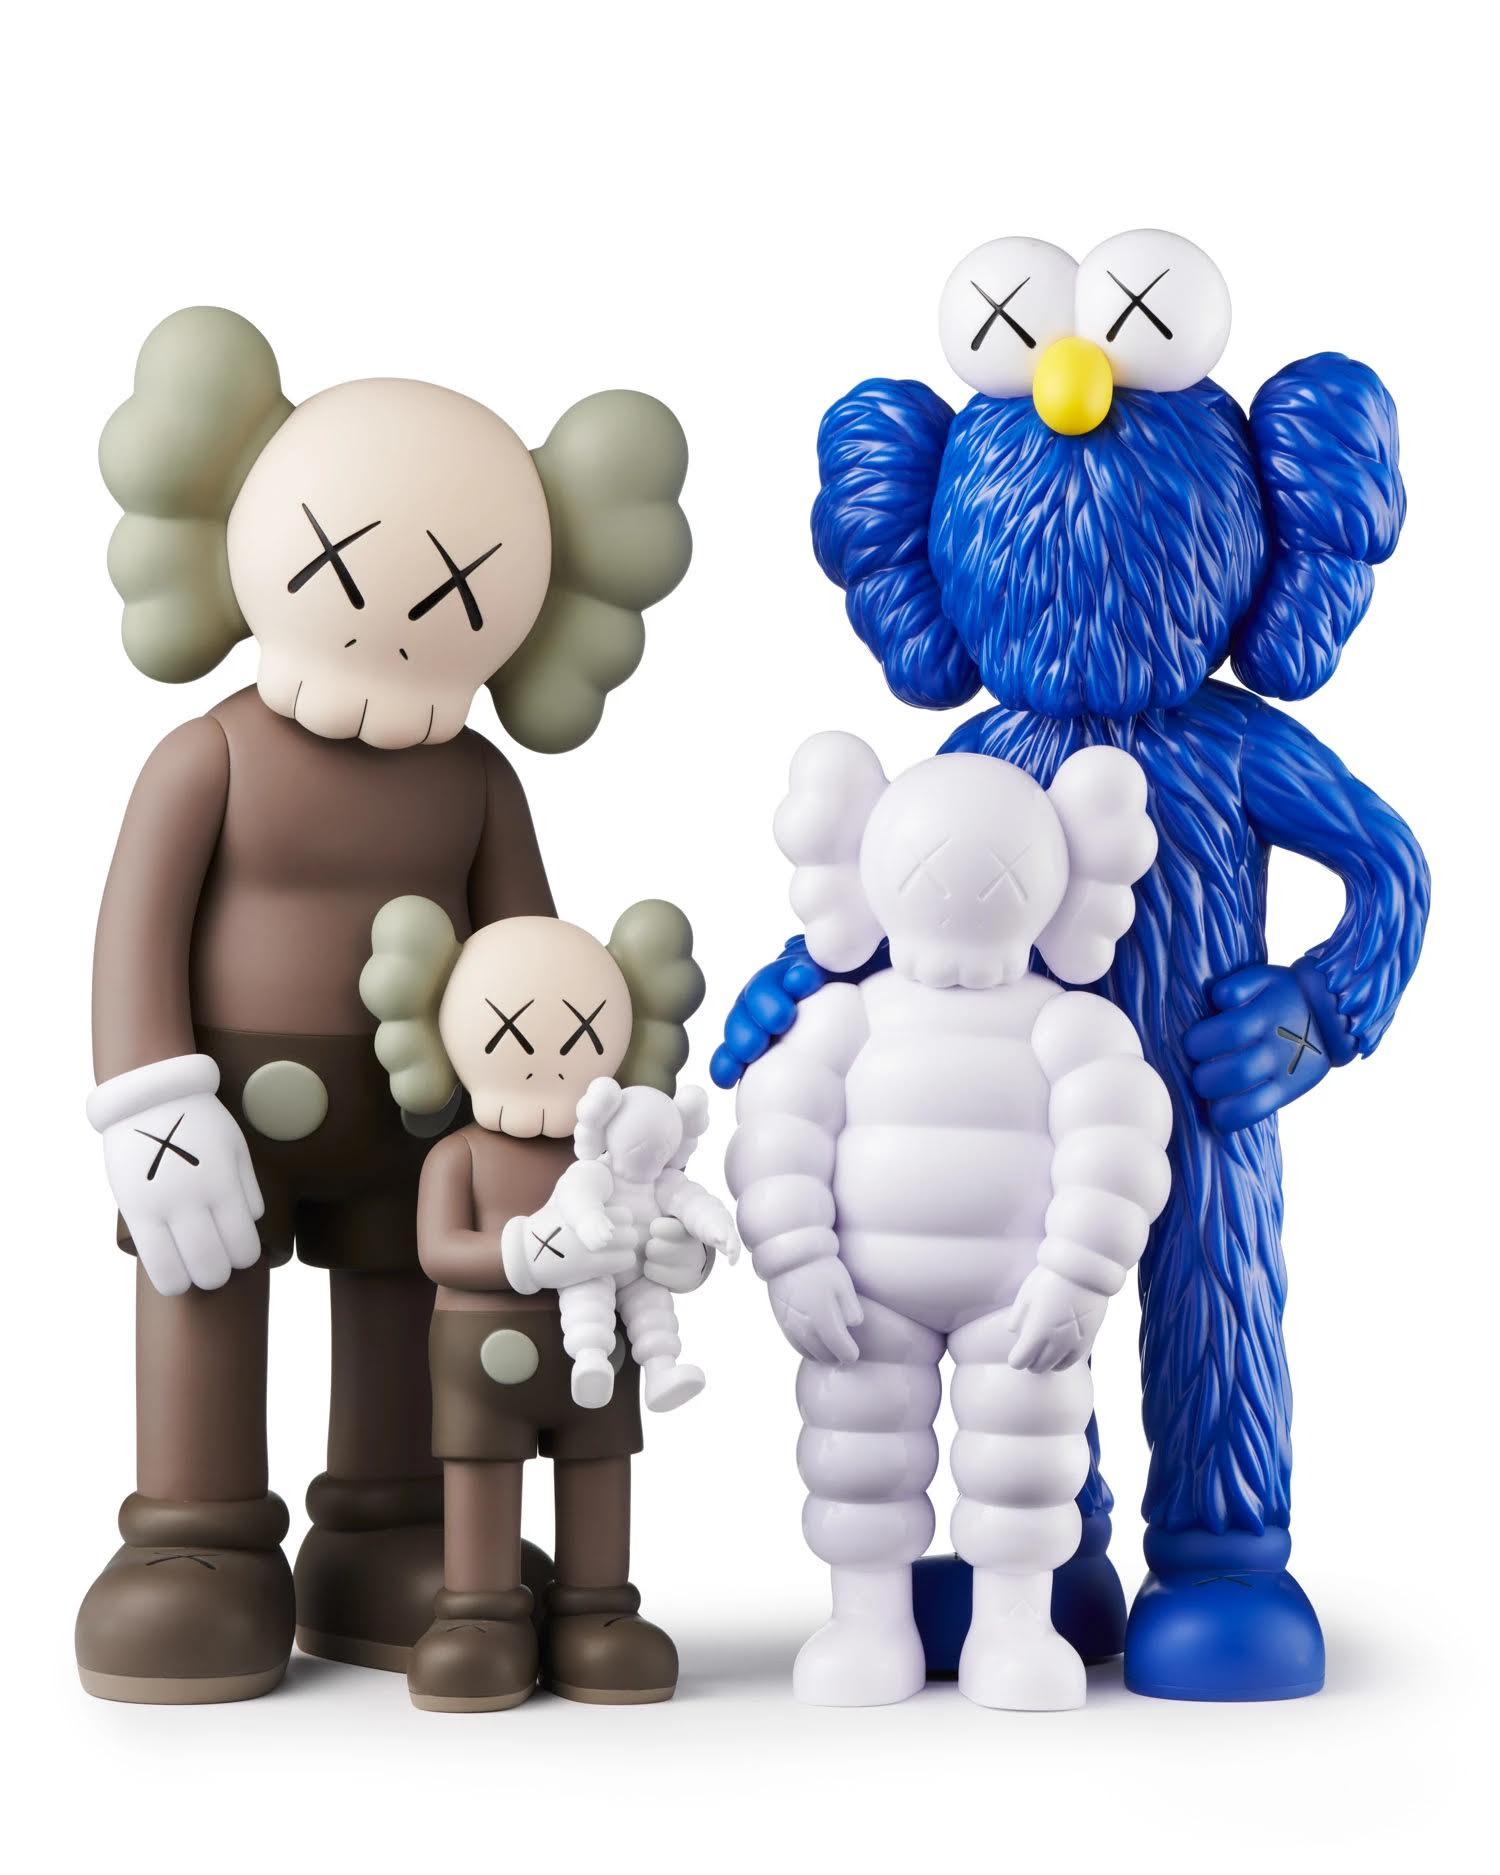 kaws meaning